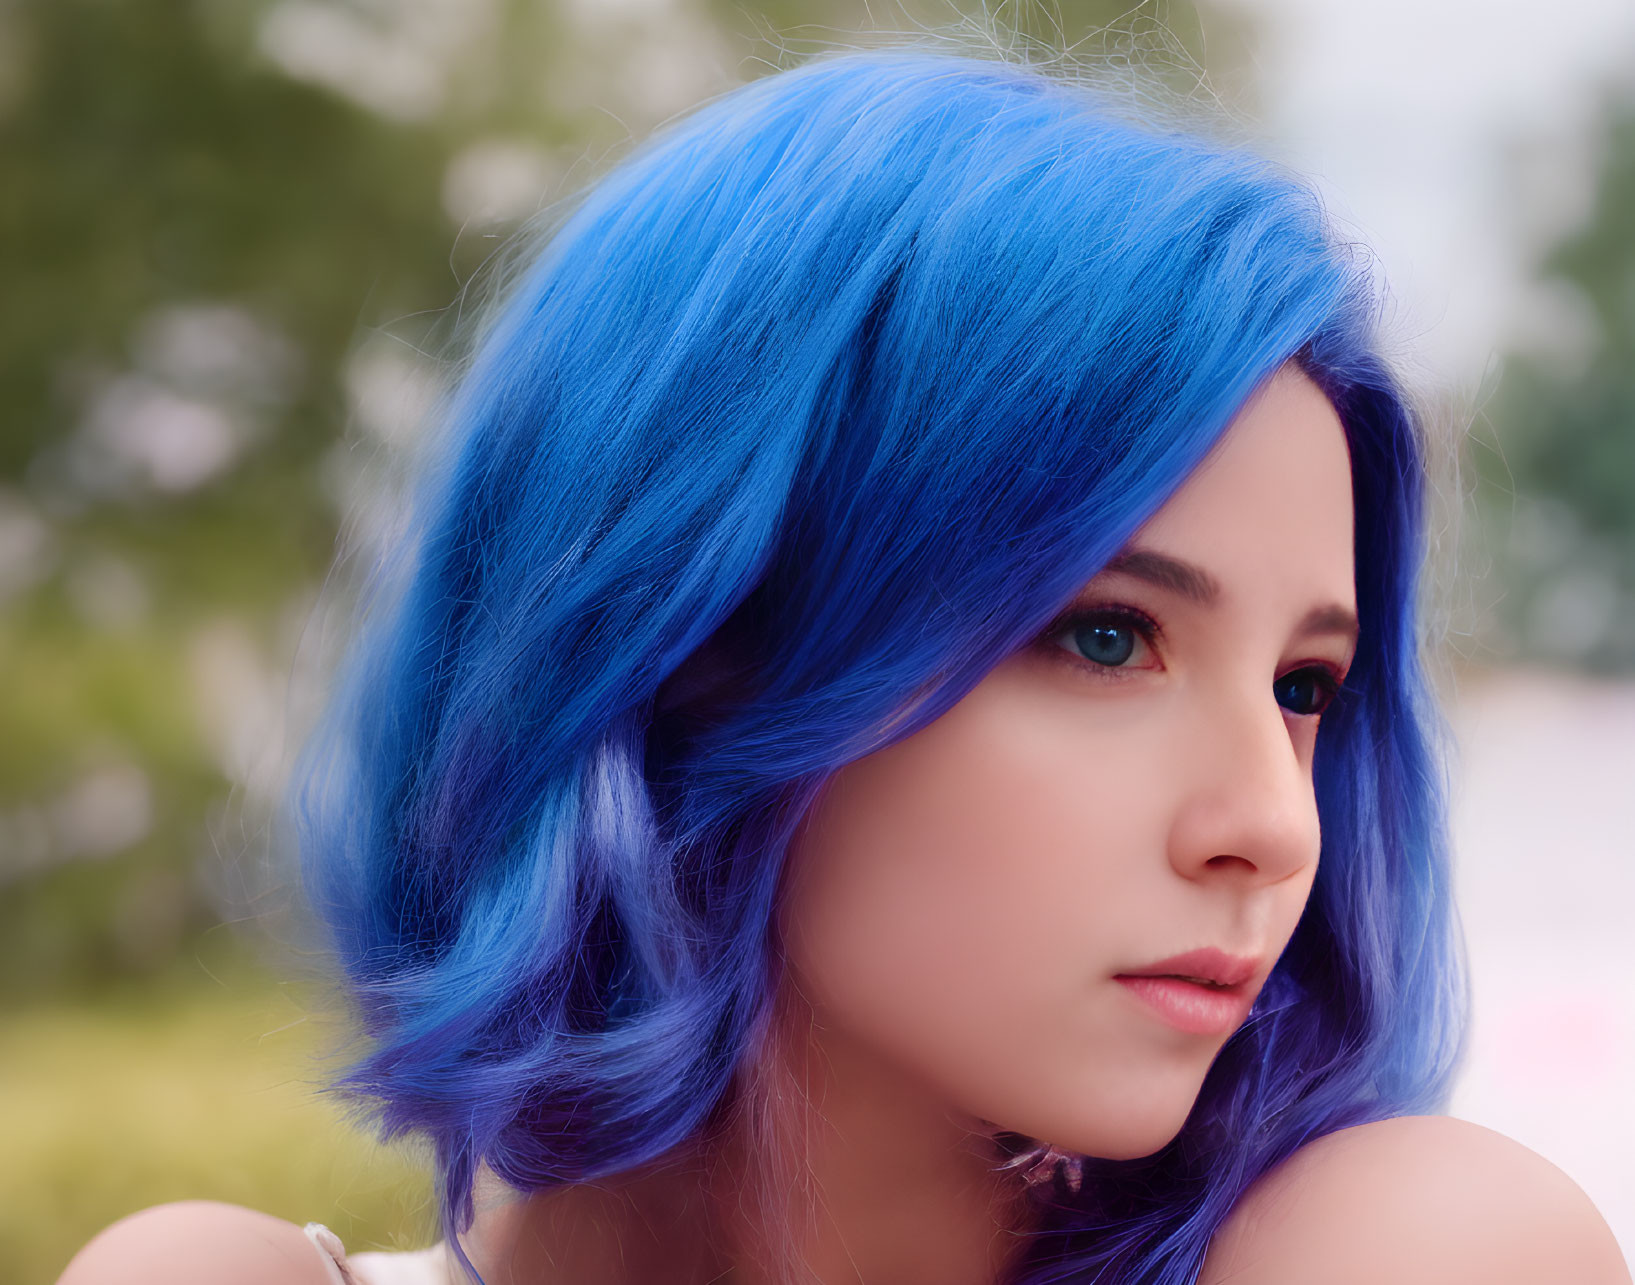 Vibrant blue-haired person with thoughtful expression in soft-focus background